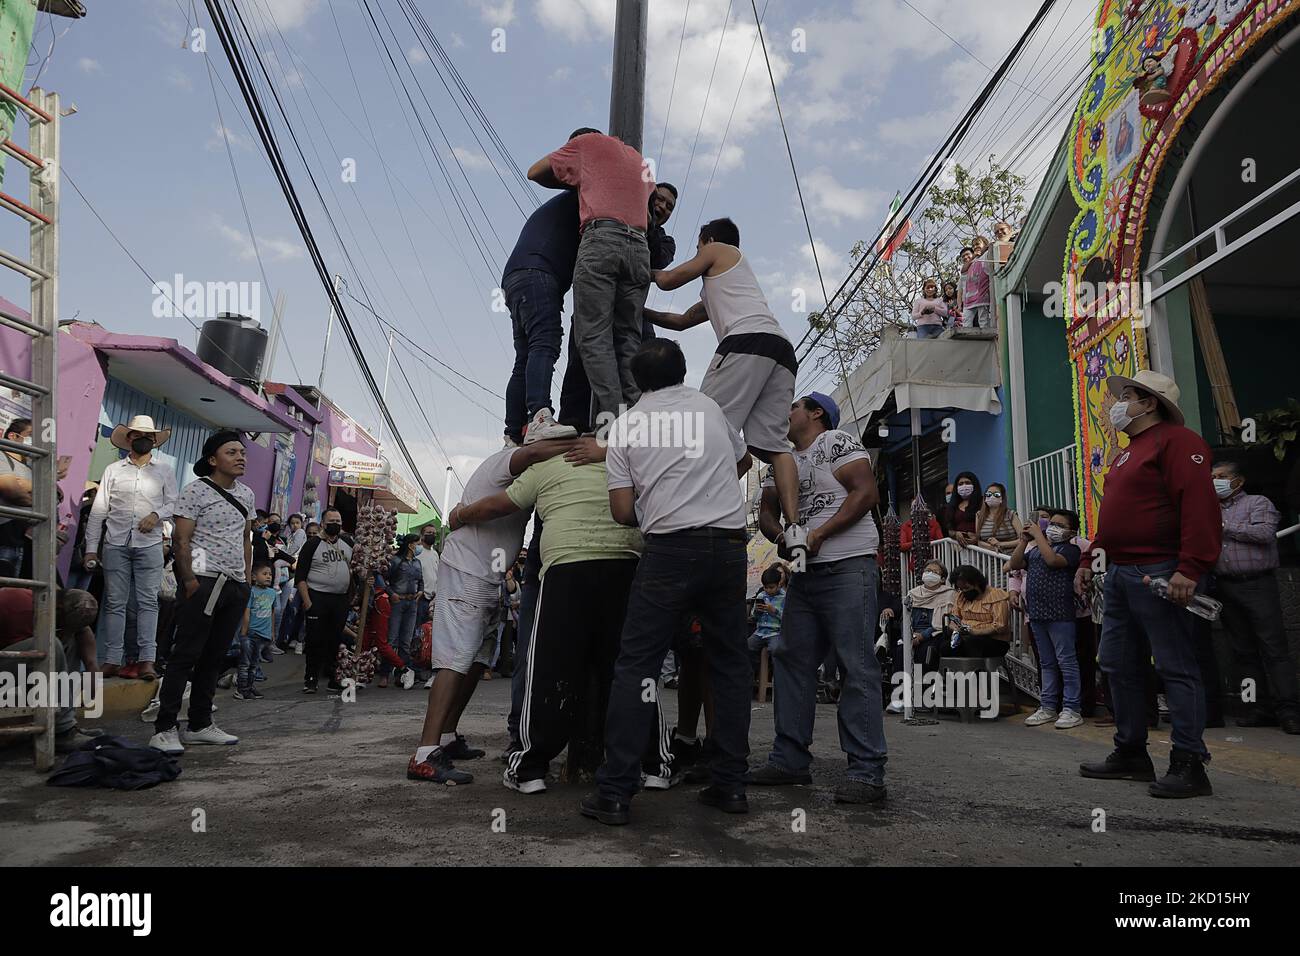 Several young people participate in the game called Palo Ensebado or Cucaña, played in the streets of San Antonio Culhuacán in Mexico City to celebrate the patron saint of animals, San Antonio Abad, which took place during the COVID-19 health emergency and the return to the yellow epidemiological traffic light after the increase in coronavirus infections in the capital. This game originated in Naples, Italy, in the 16th century. In its Mexican version, it consists of organising a team of people of different complexions to obtain the prizes that are placed at the top of a stick smeared with lar Stock Photo